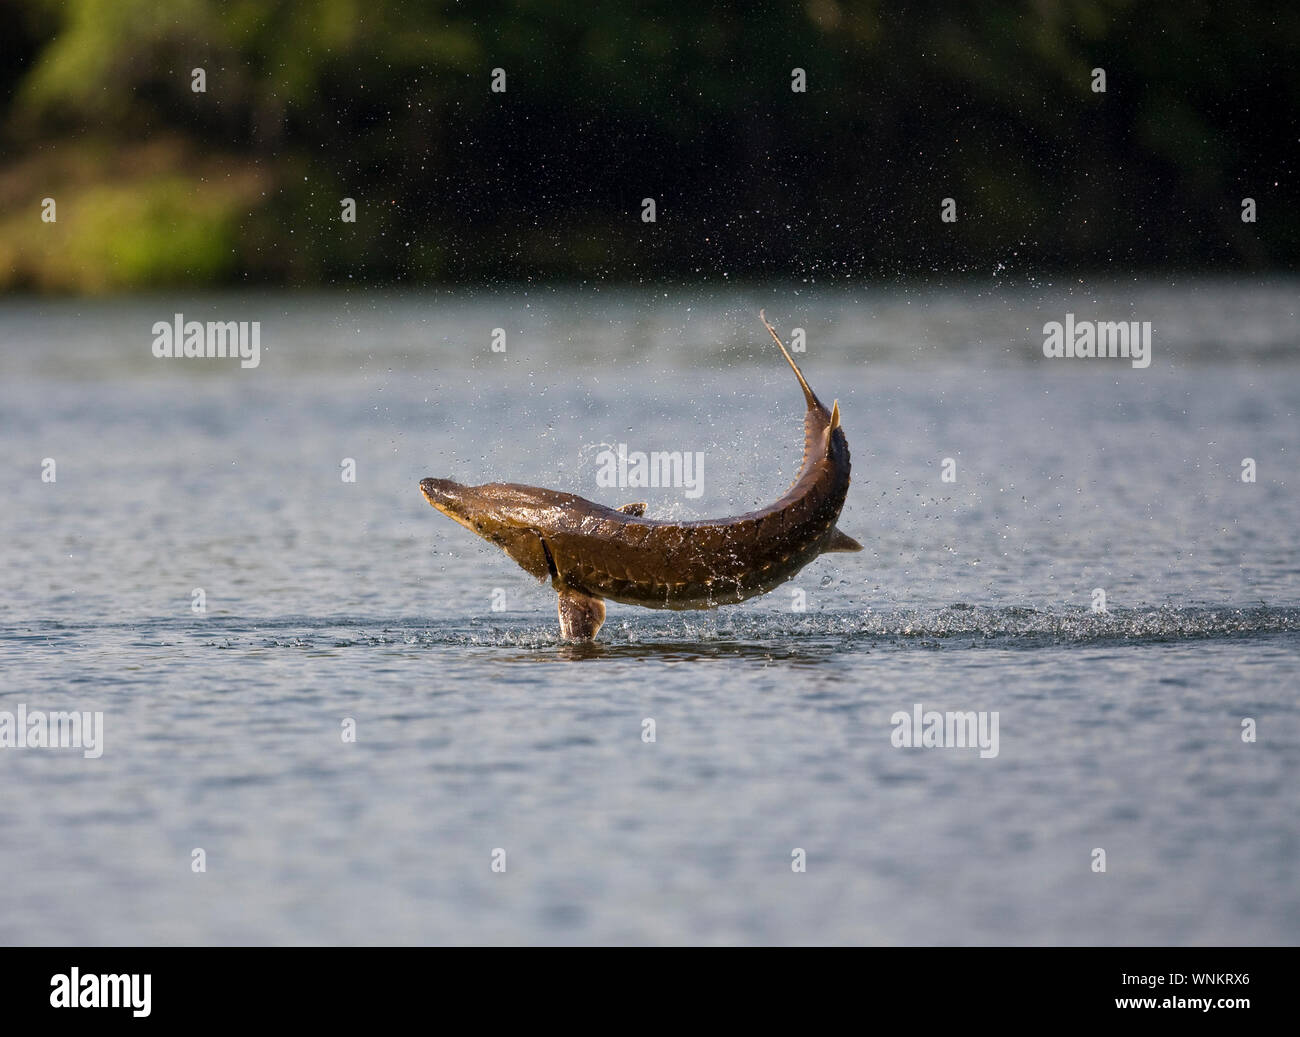 A Gulf sturgeon jumps out of the Suwannee River in Fanning Springs, Florida. The leaping sturgeon, who have hard plates covering their body, have inju Stock Photo